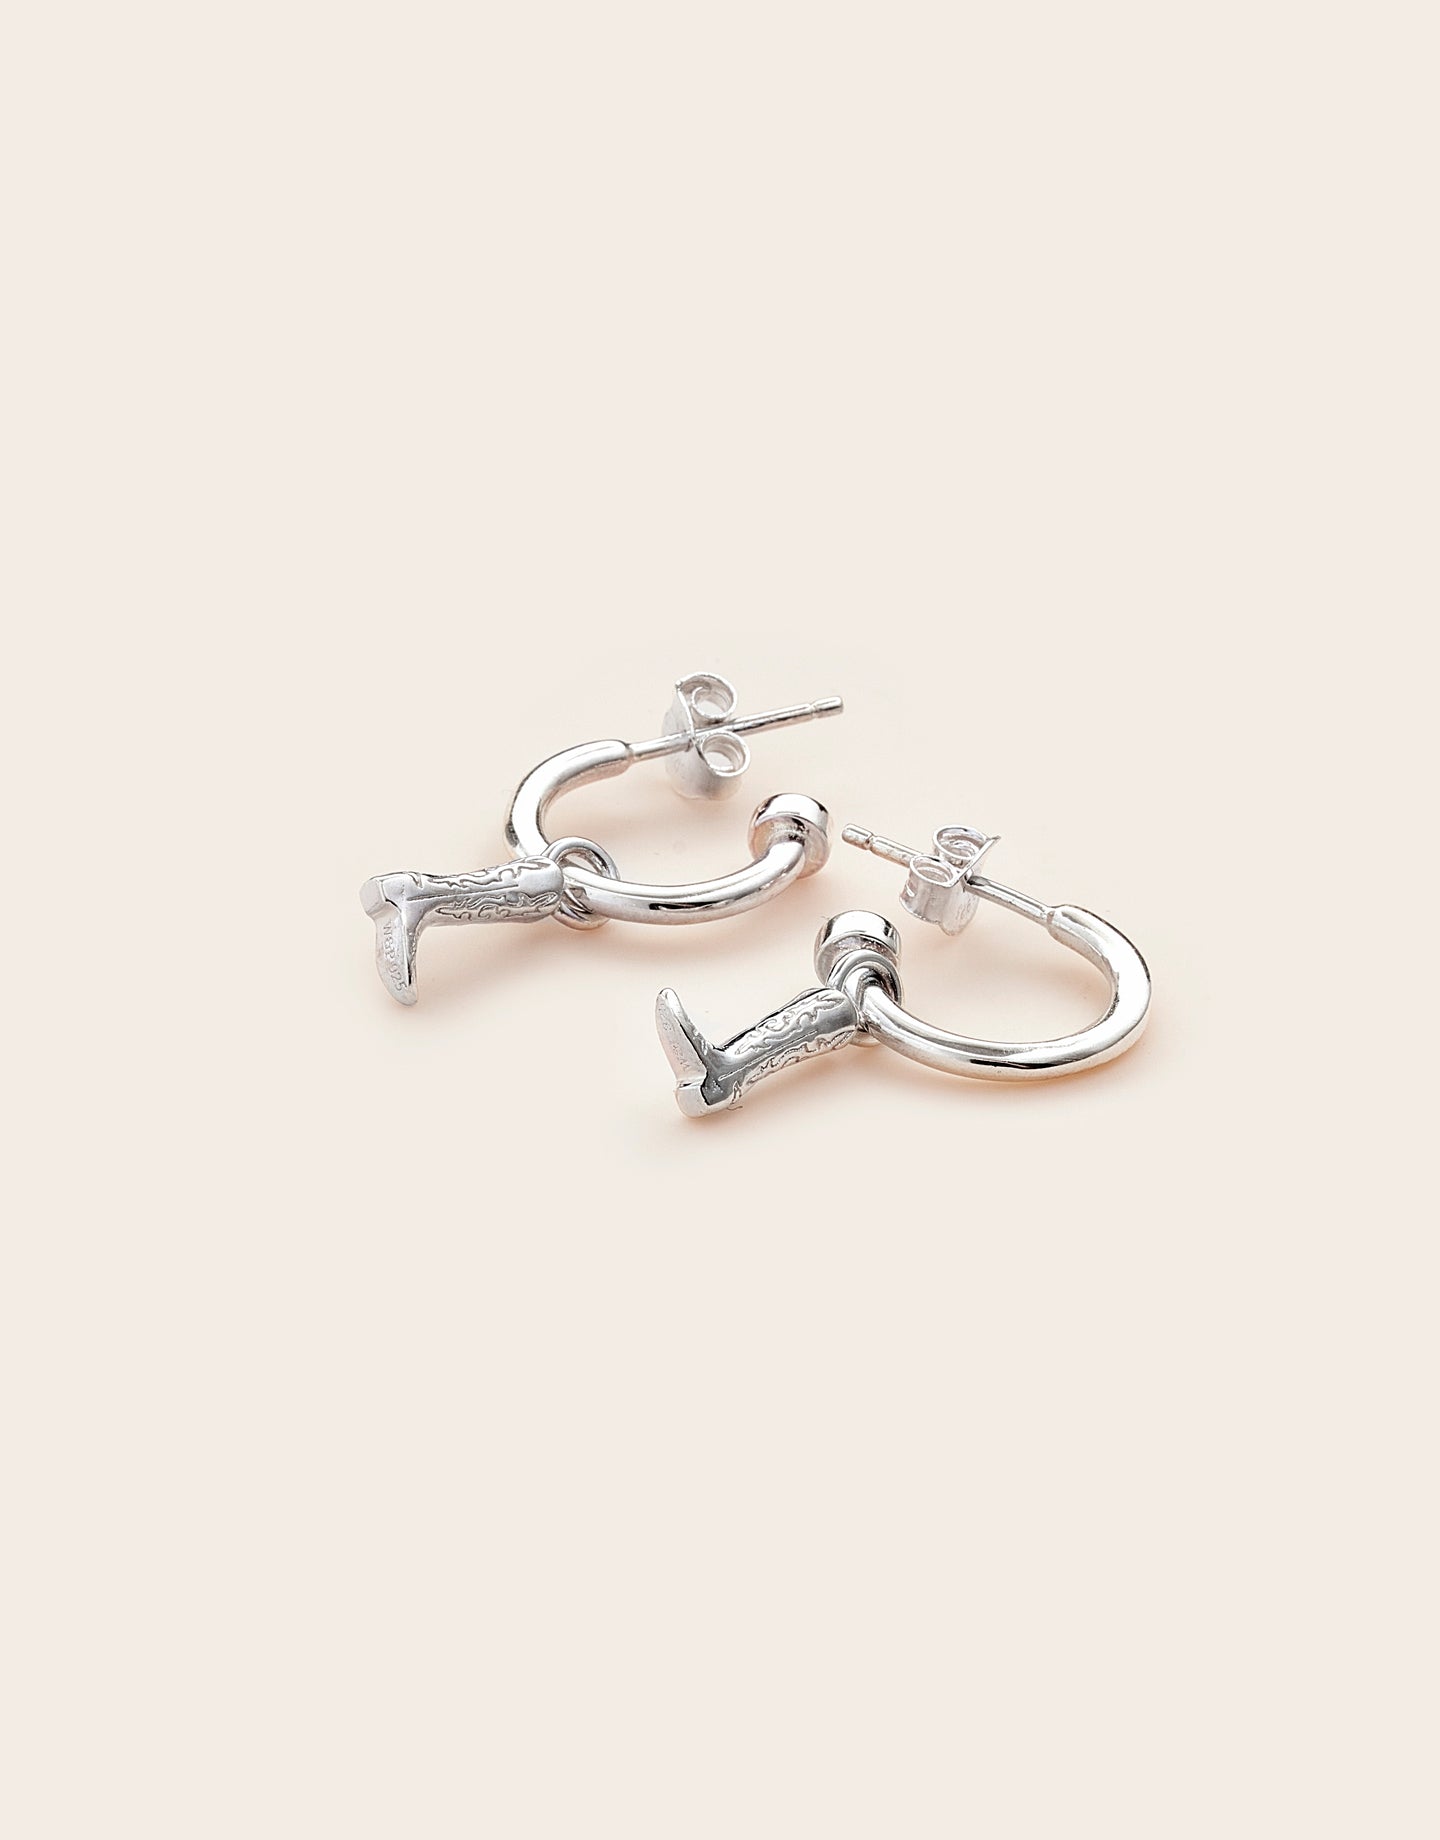 Baby boot hoops silver